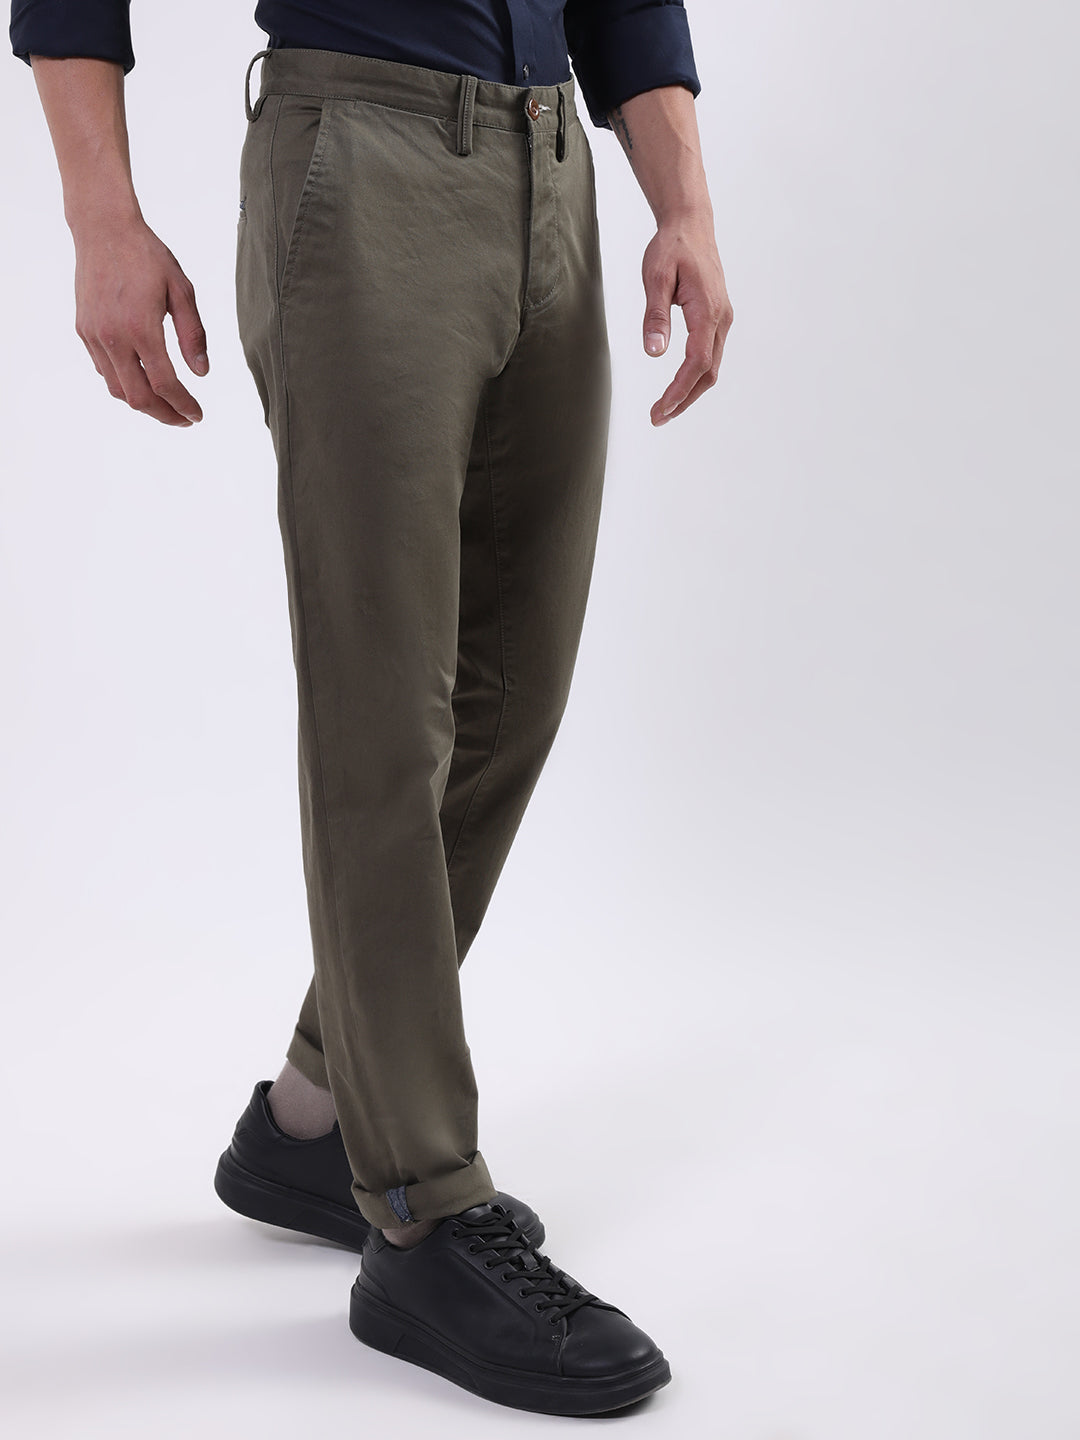 Selected Homme cotton mix loose fit smart trouser with front pleat in cream  | ASOS